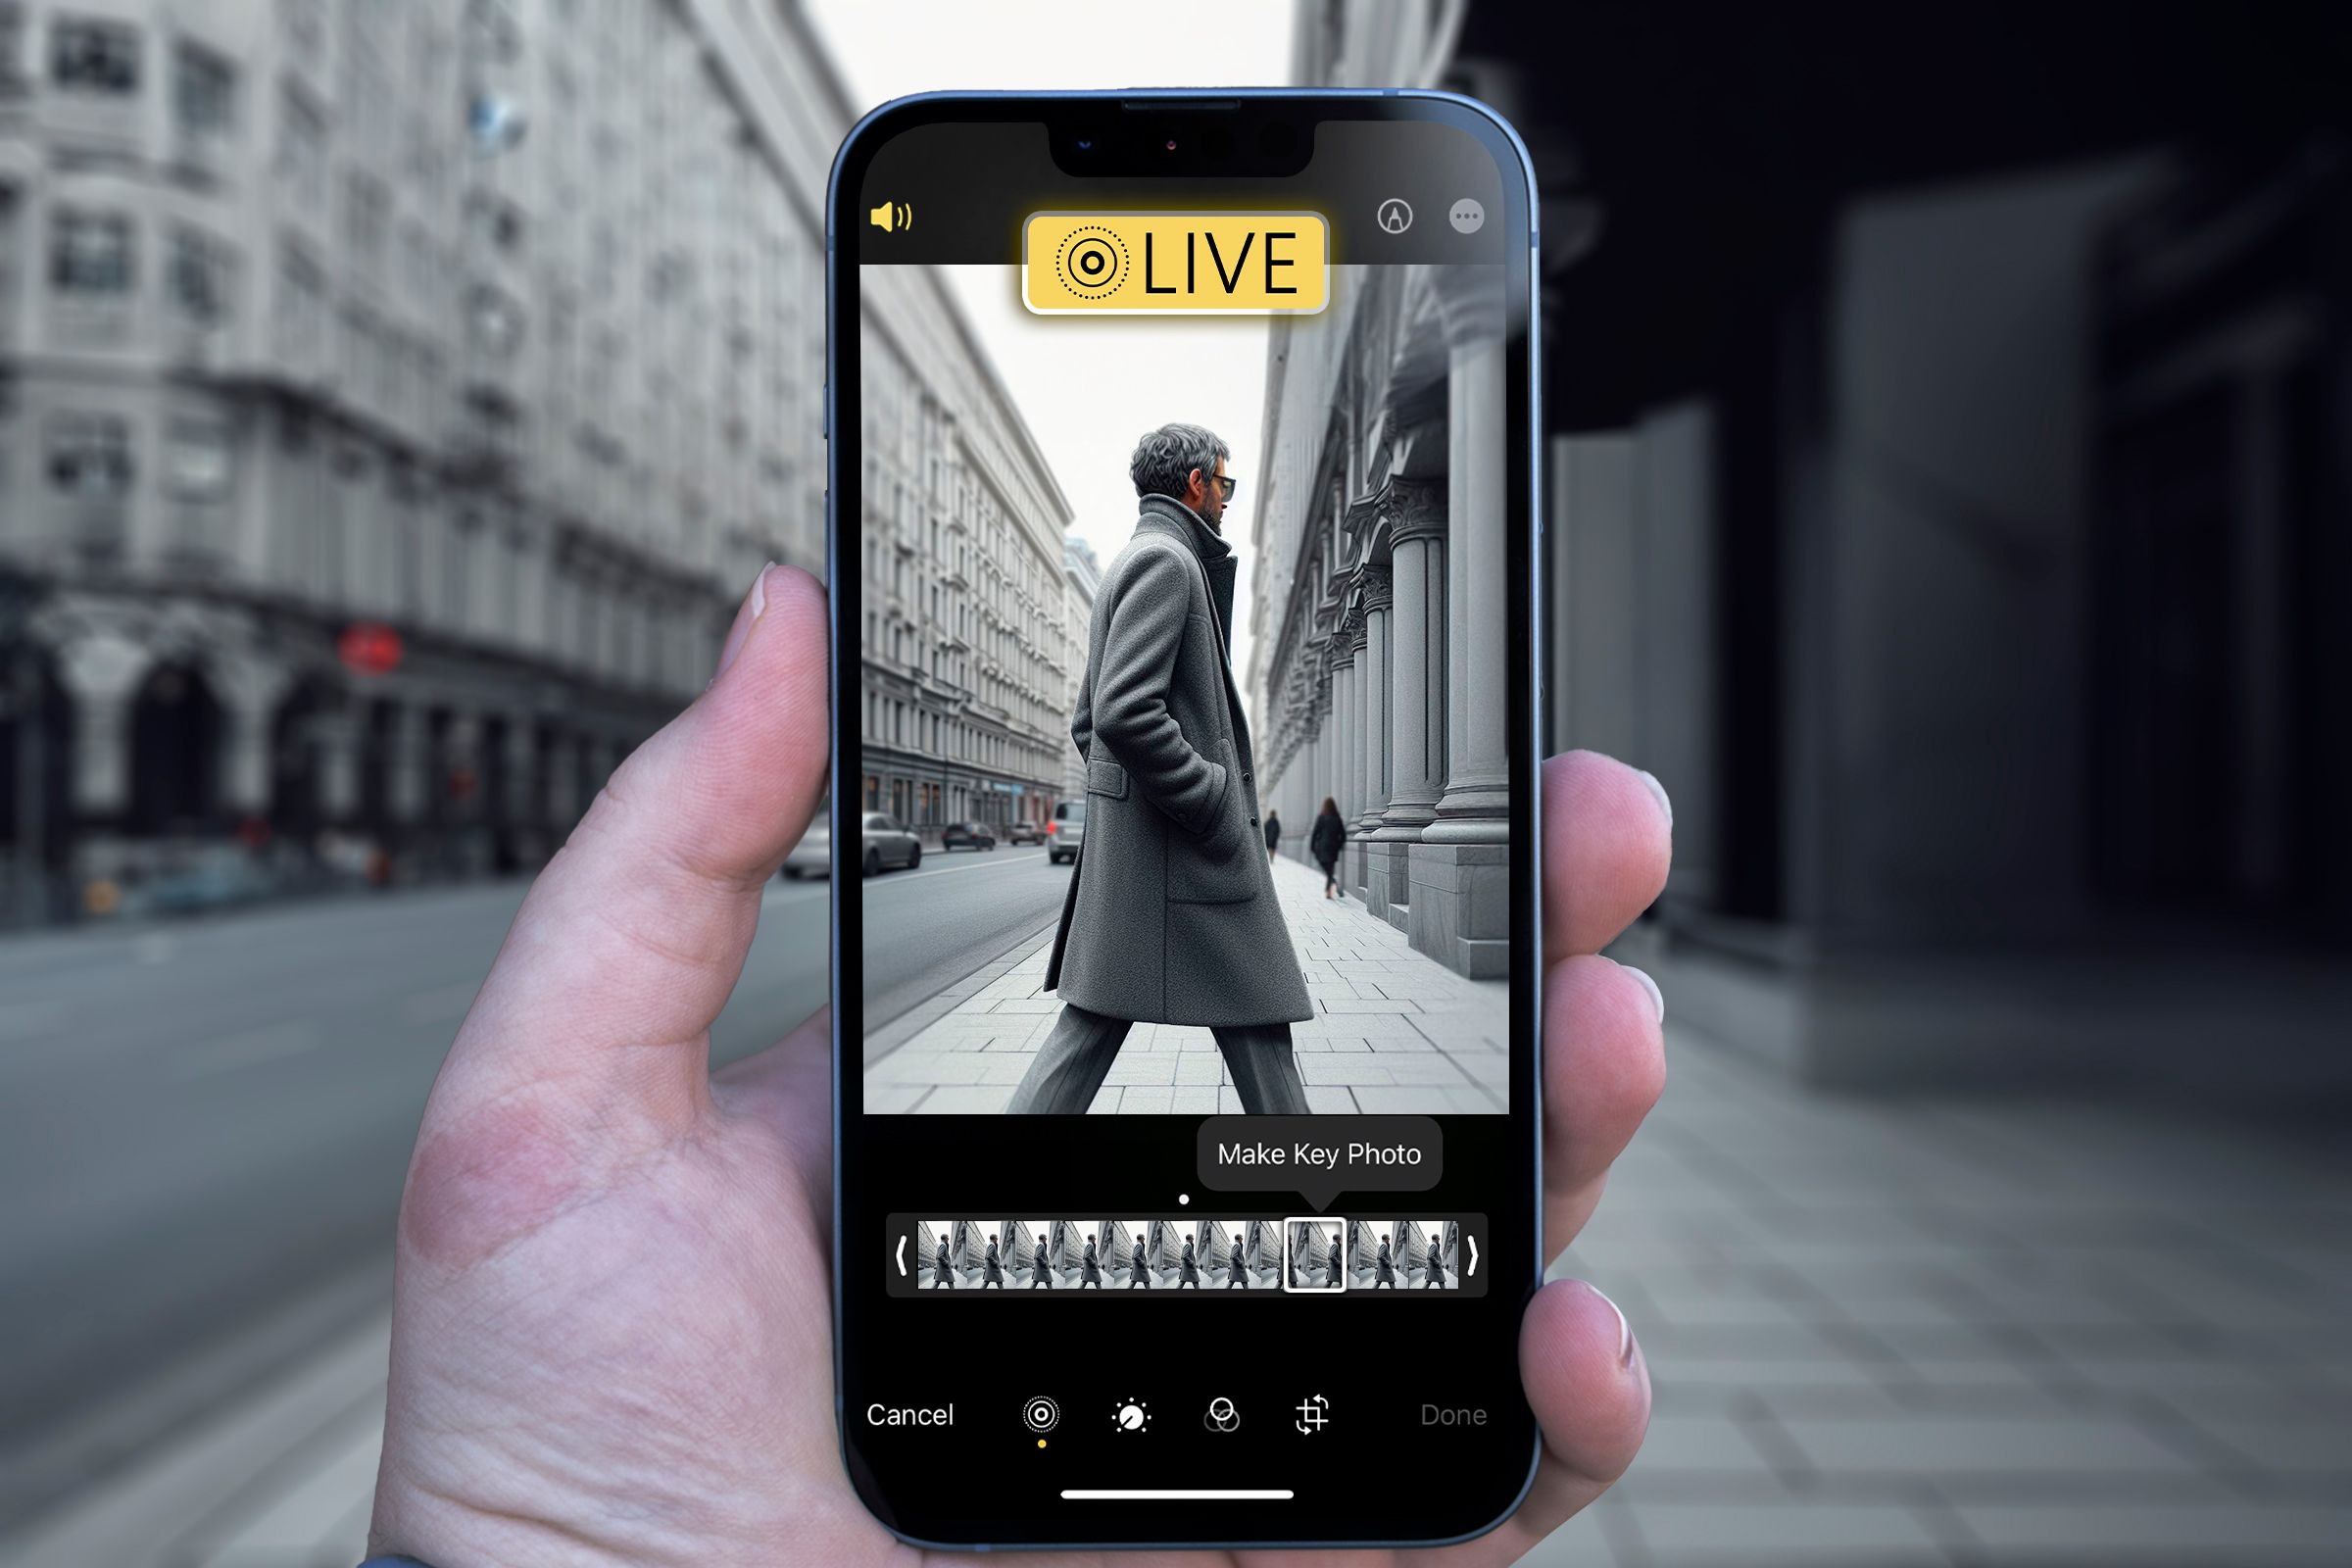 IPhone with the camera in 'Live Photo' mode capturing a man walking on the street.